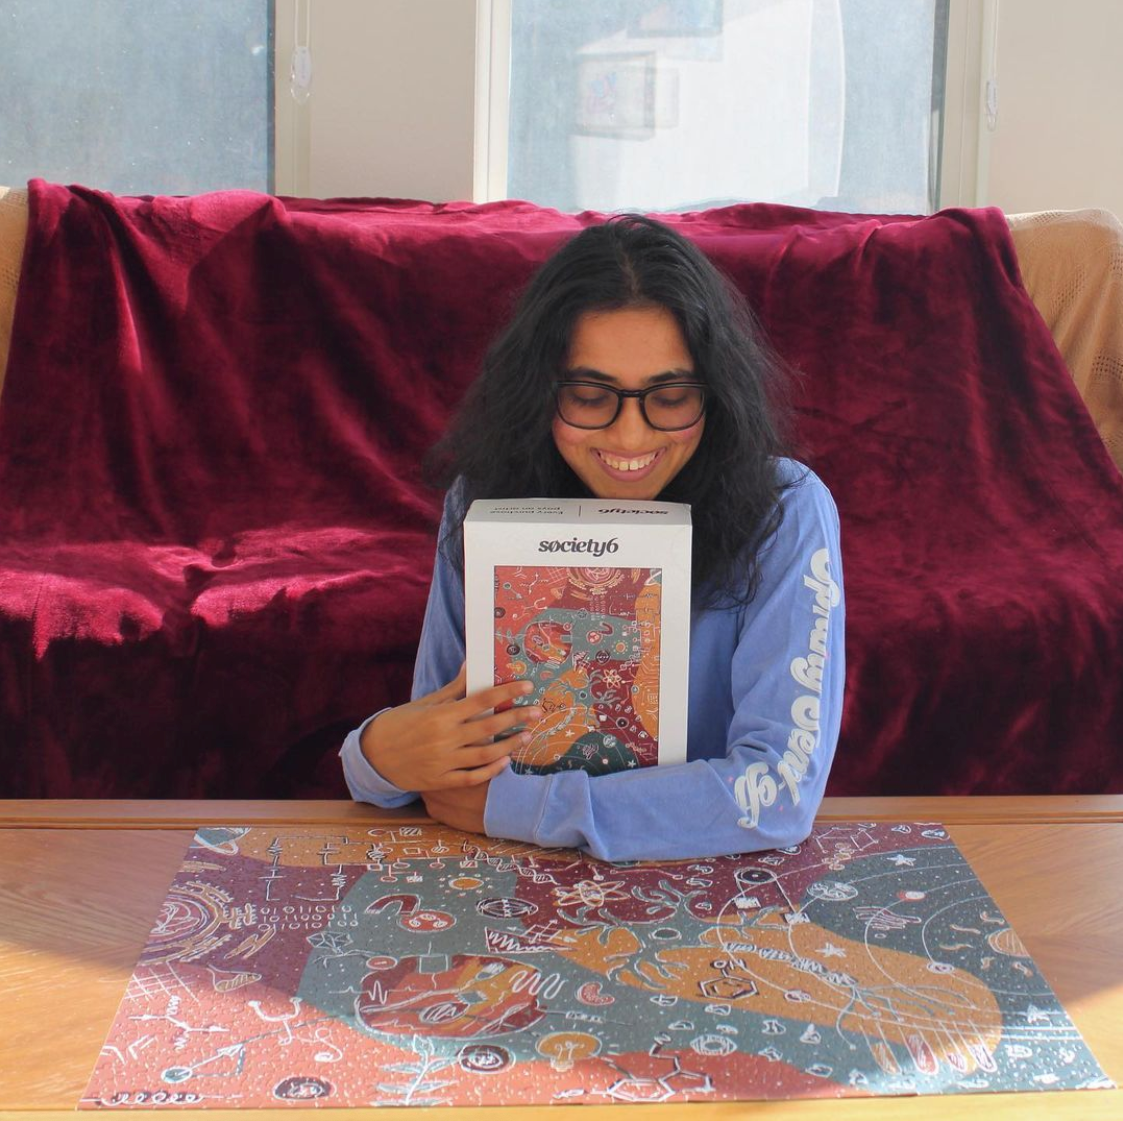 Sumana posing with a science themed puzzled from Society6